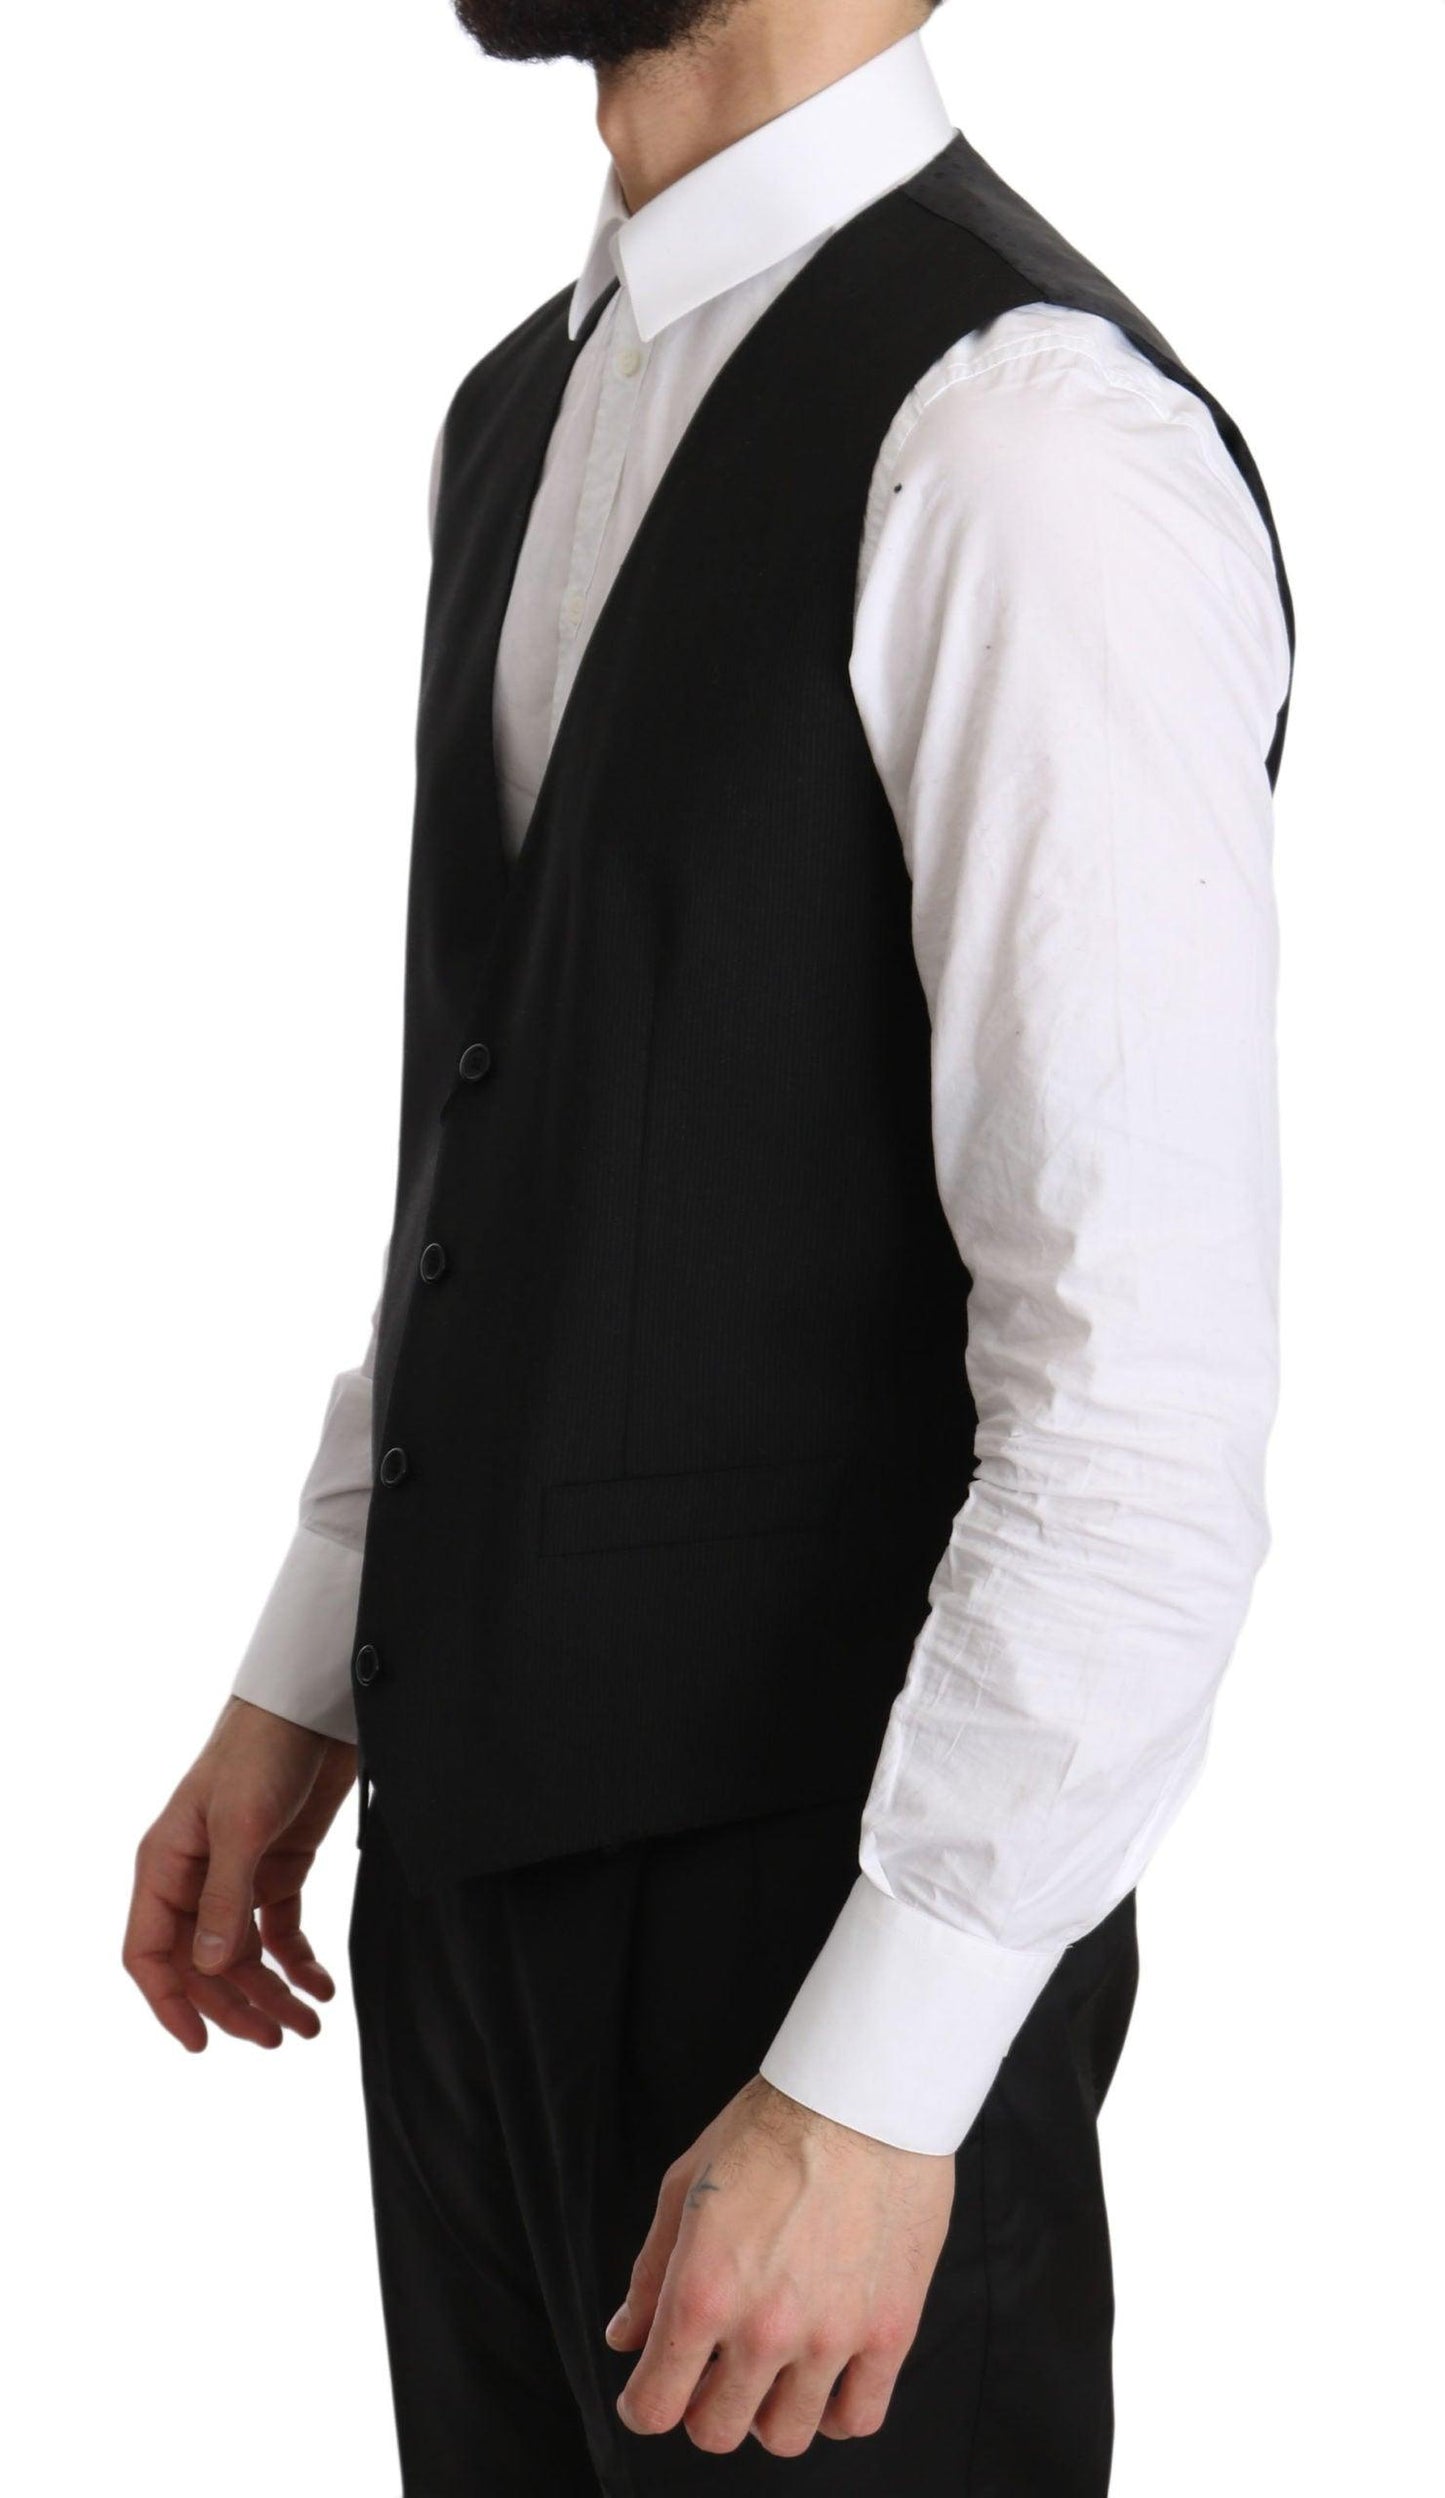 Gray Gilet STAFF Regular Fit Formal Vest - Designed by Dolce & Gabbana Available to Buy at a Discounted Price on Moon Behind The Hill Online Designer Discount Store